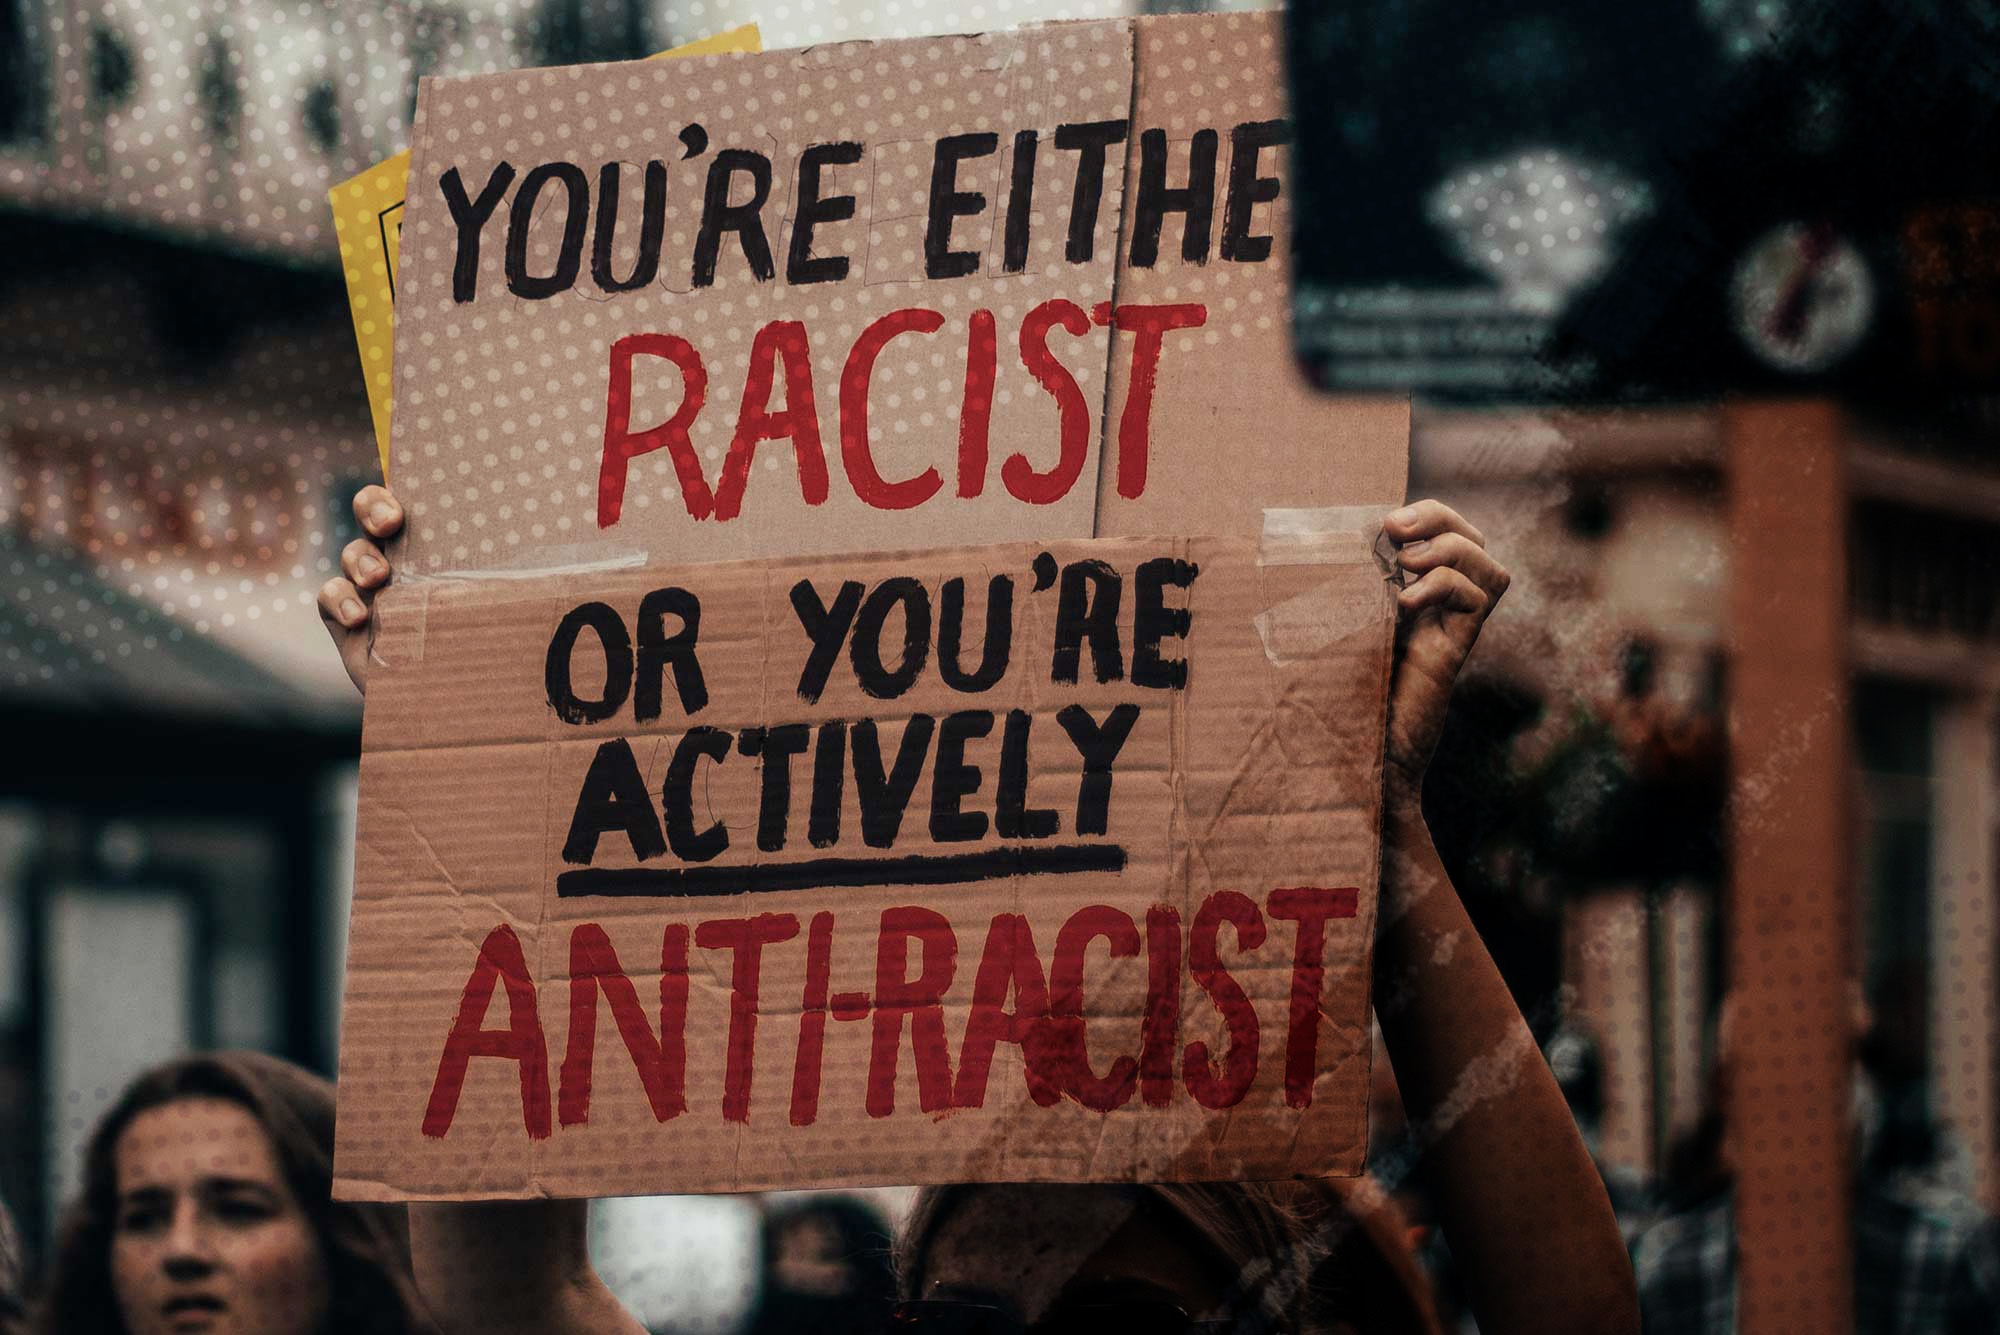 Photo of a woman holding a sign that says "You're either racist or you're actively anti-racist" at a protest.